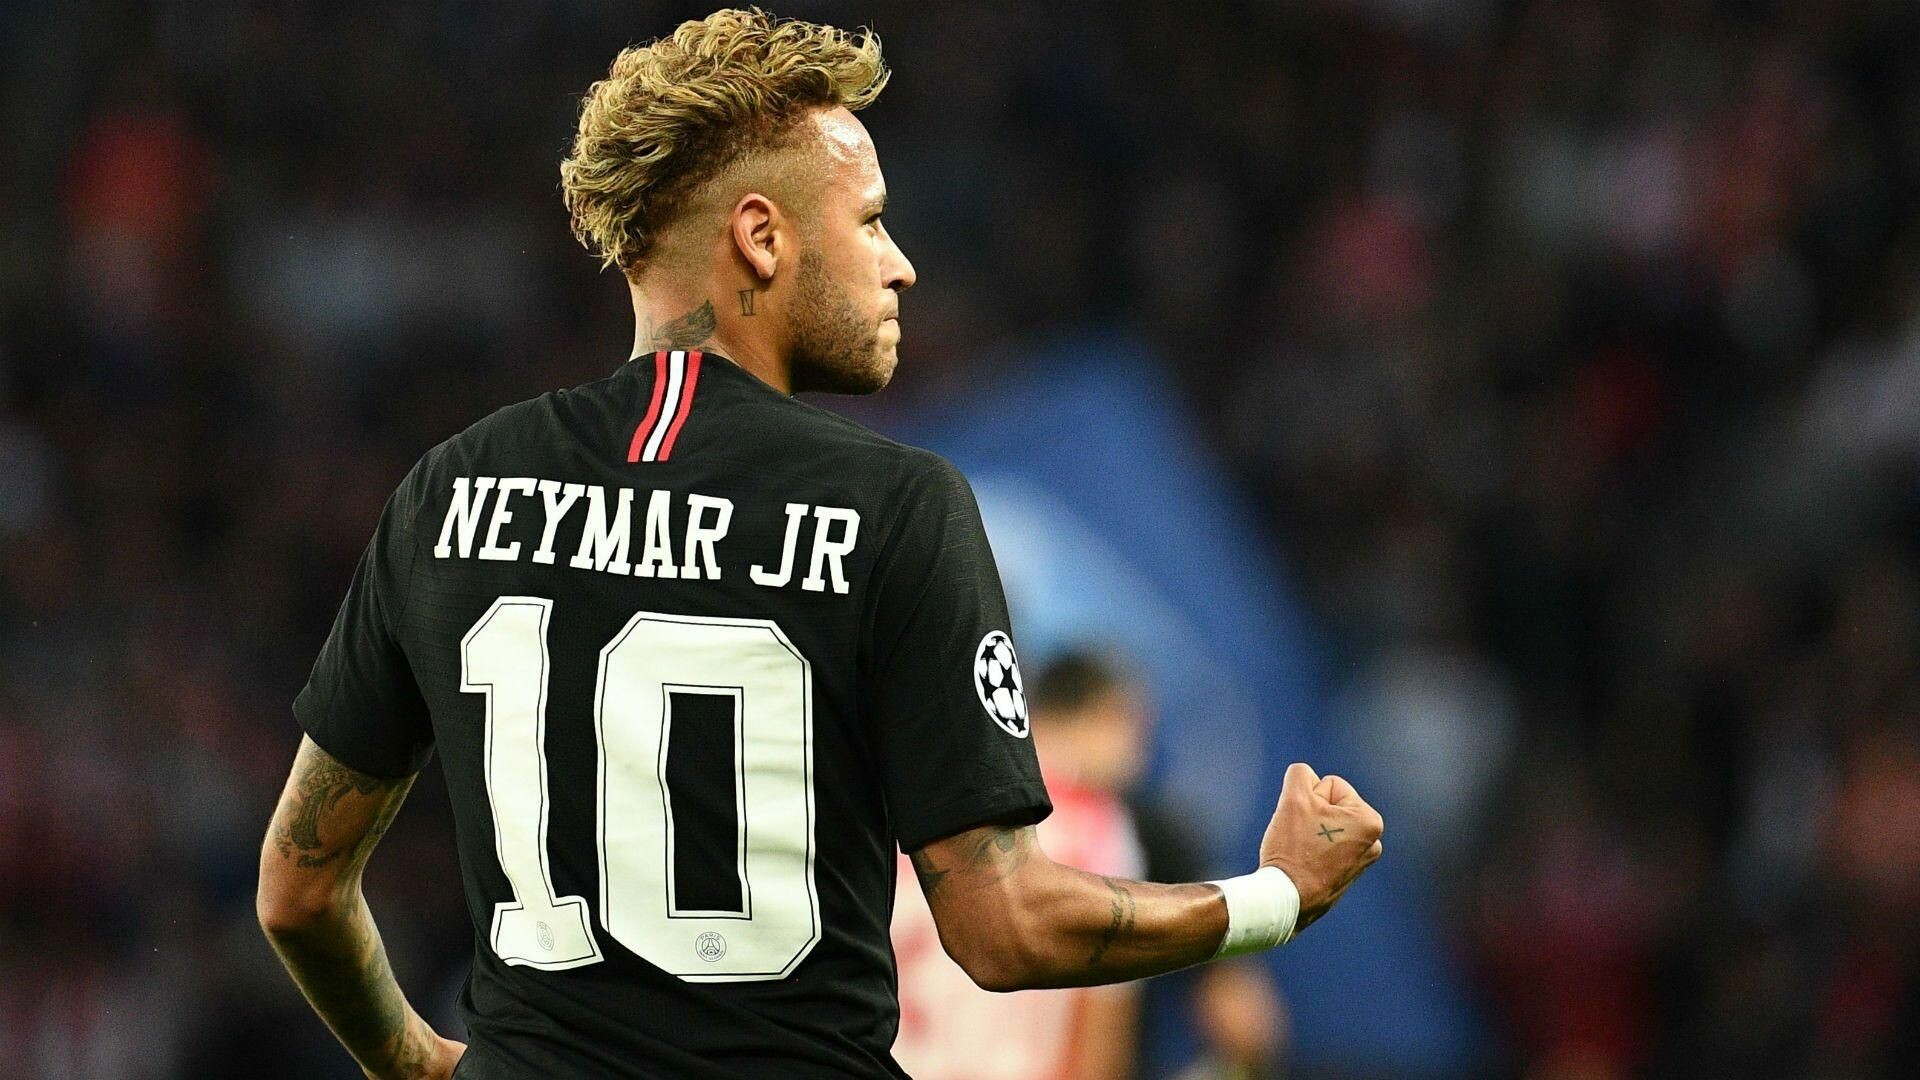 Neymar: He scored his 100th goal with PSG in a 5–0 win over Metz on 21 May 2022. 1920x1080 Full HD Wallpaper.